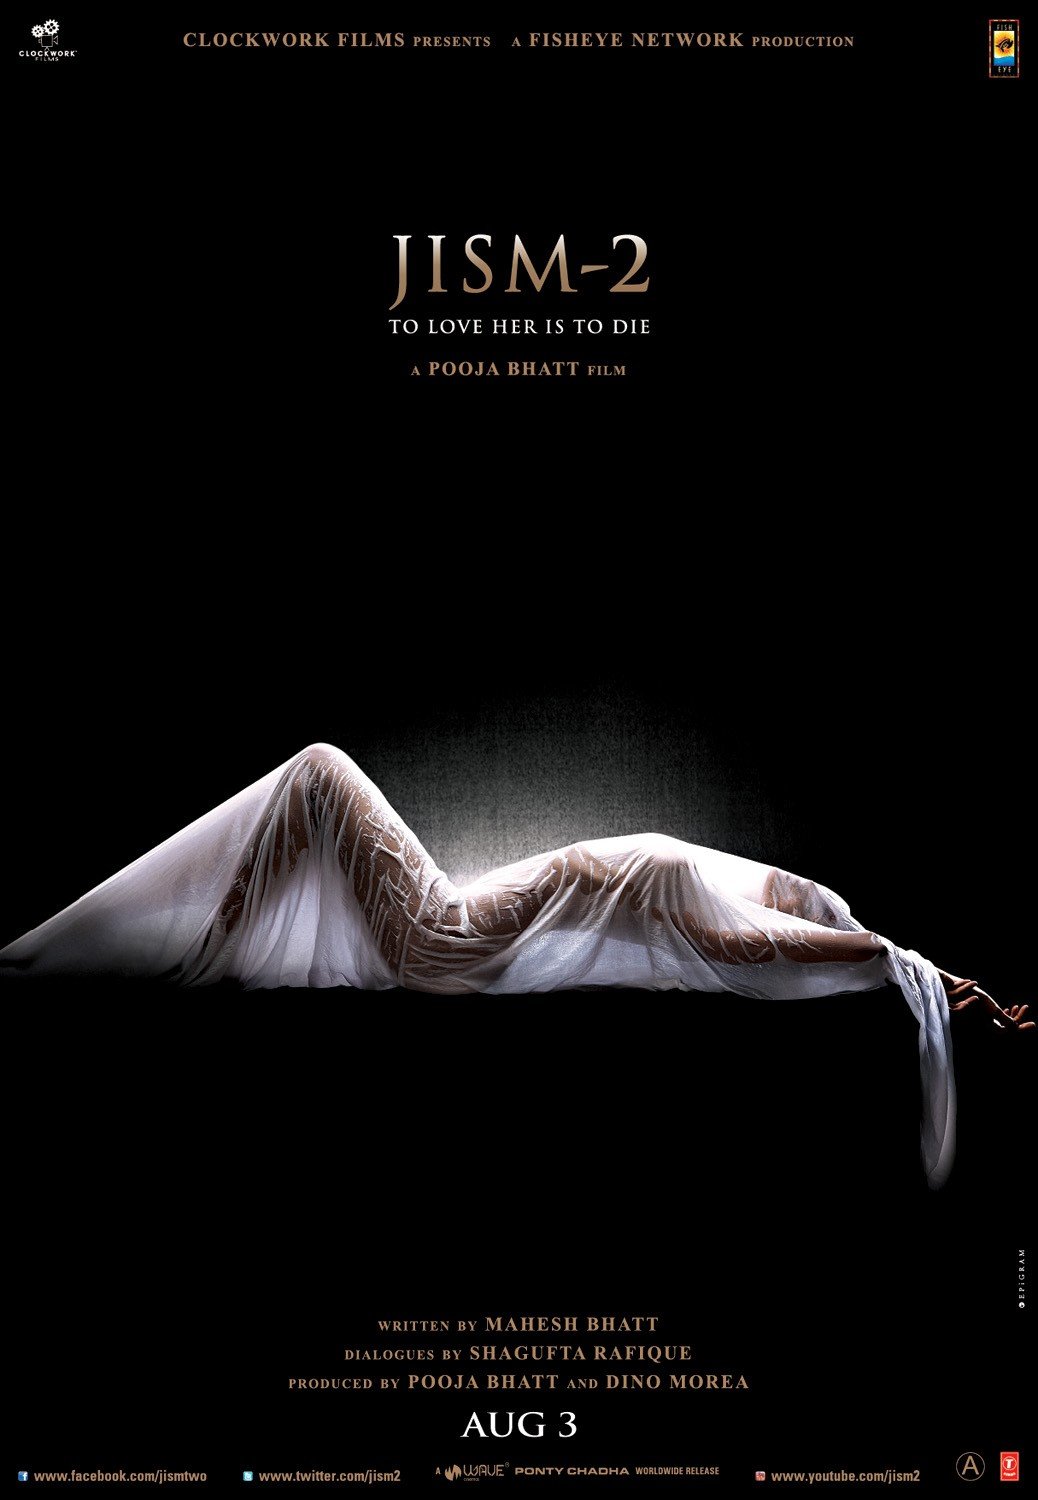 christopher wilhelm recommends jism2 full movie online pic